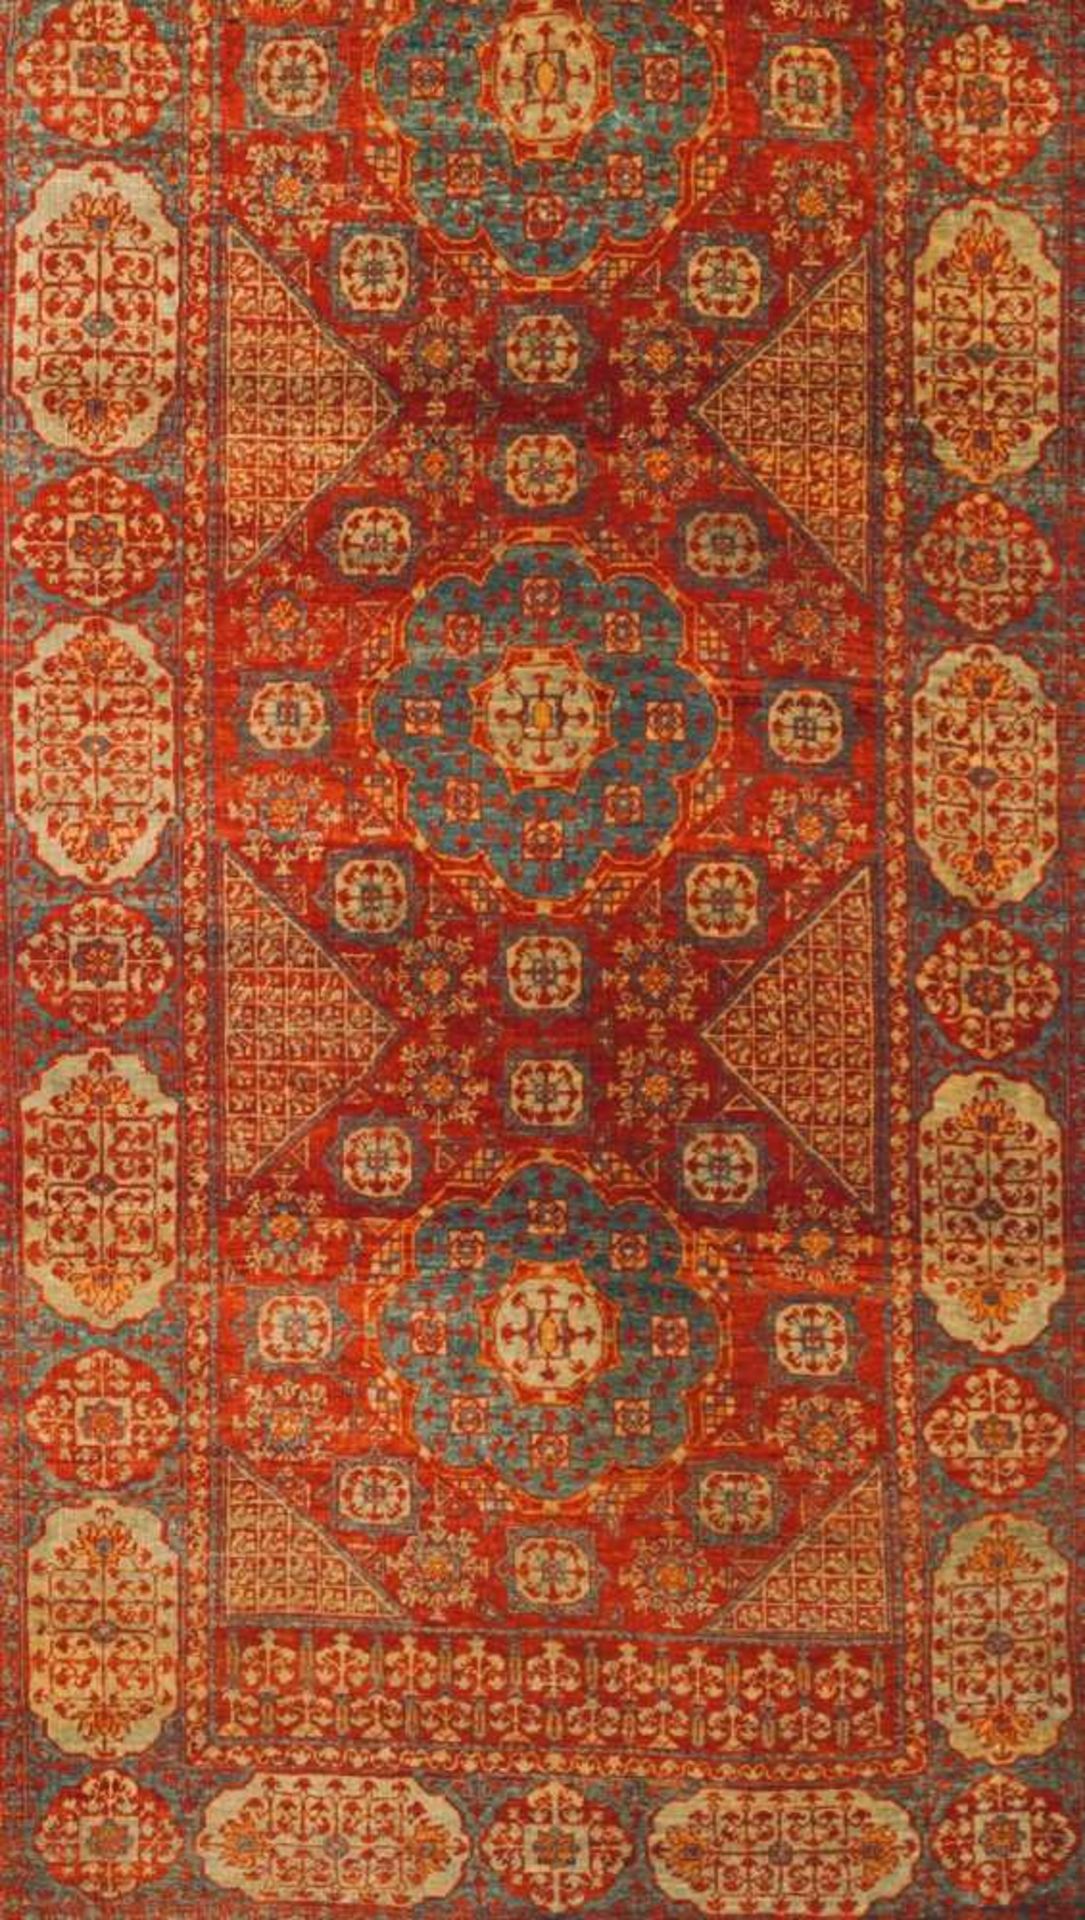 A Mamluk carpet Cotton and wool Blue, yellow, green and red decoration 347x104 cm